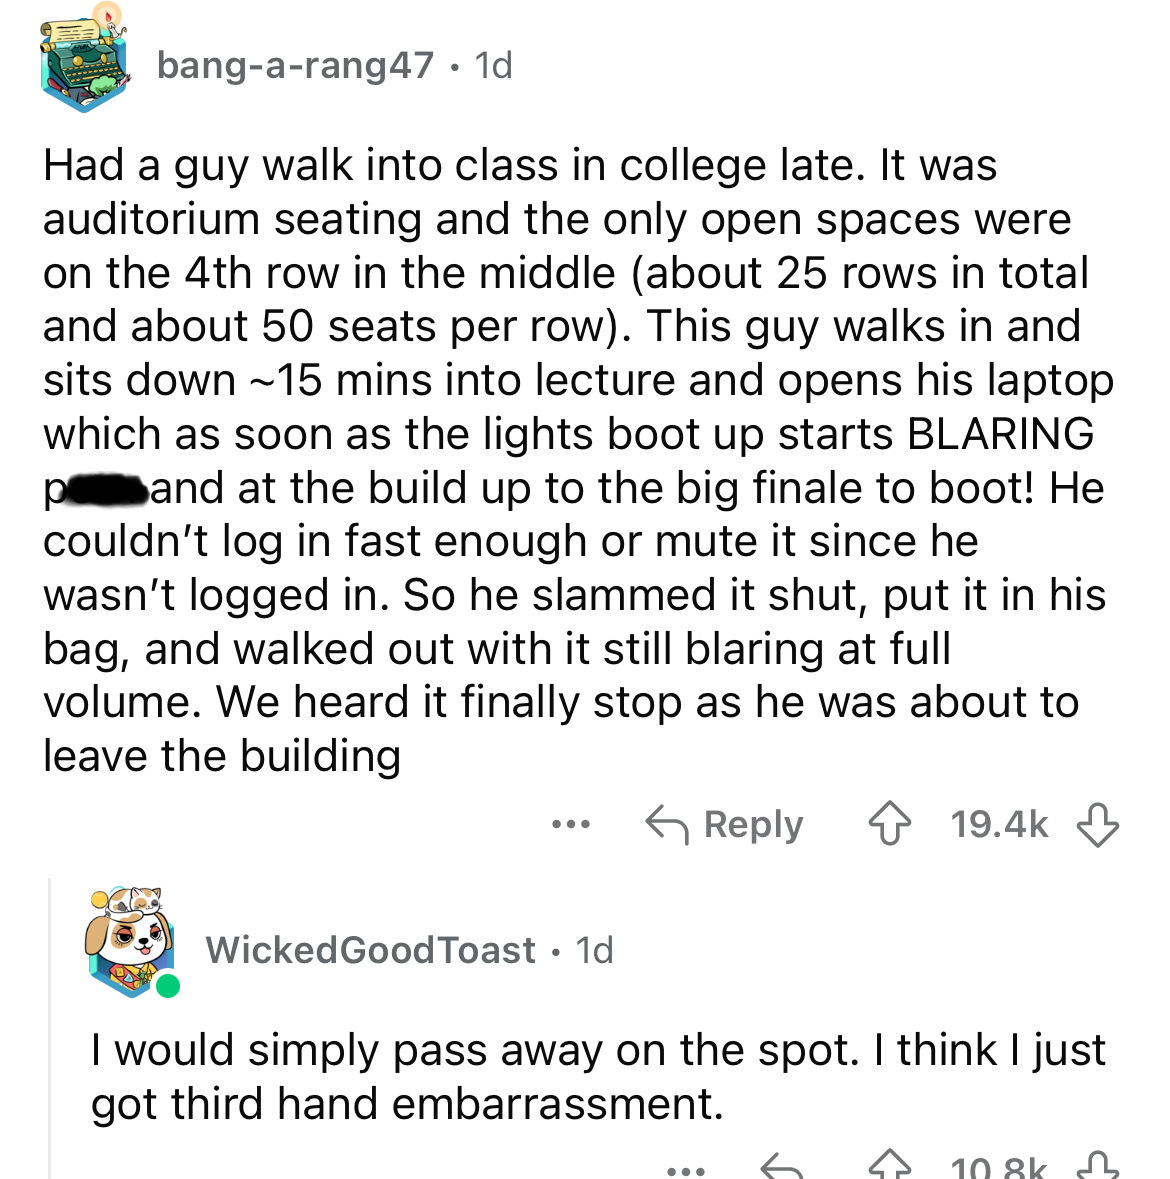 document - bangarang47 1d Had a guy walk into class in college late. It was auditorium seating and the only open spaces were on the 4th row in the middle about 25 rows in total and about 50 seats per row. This guy walks in and sits down ~15 mins into lect